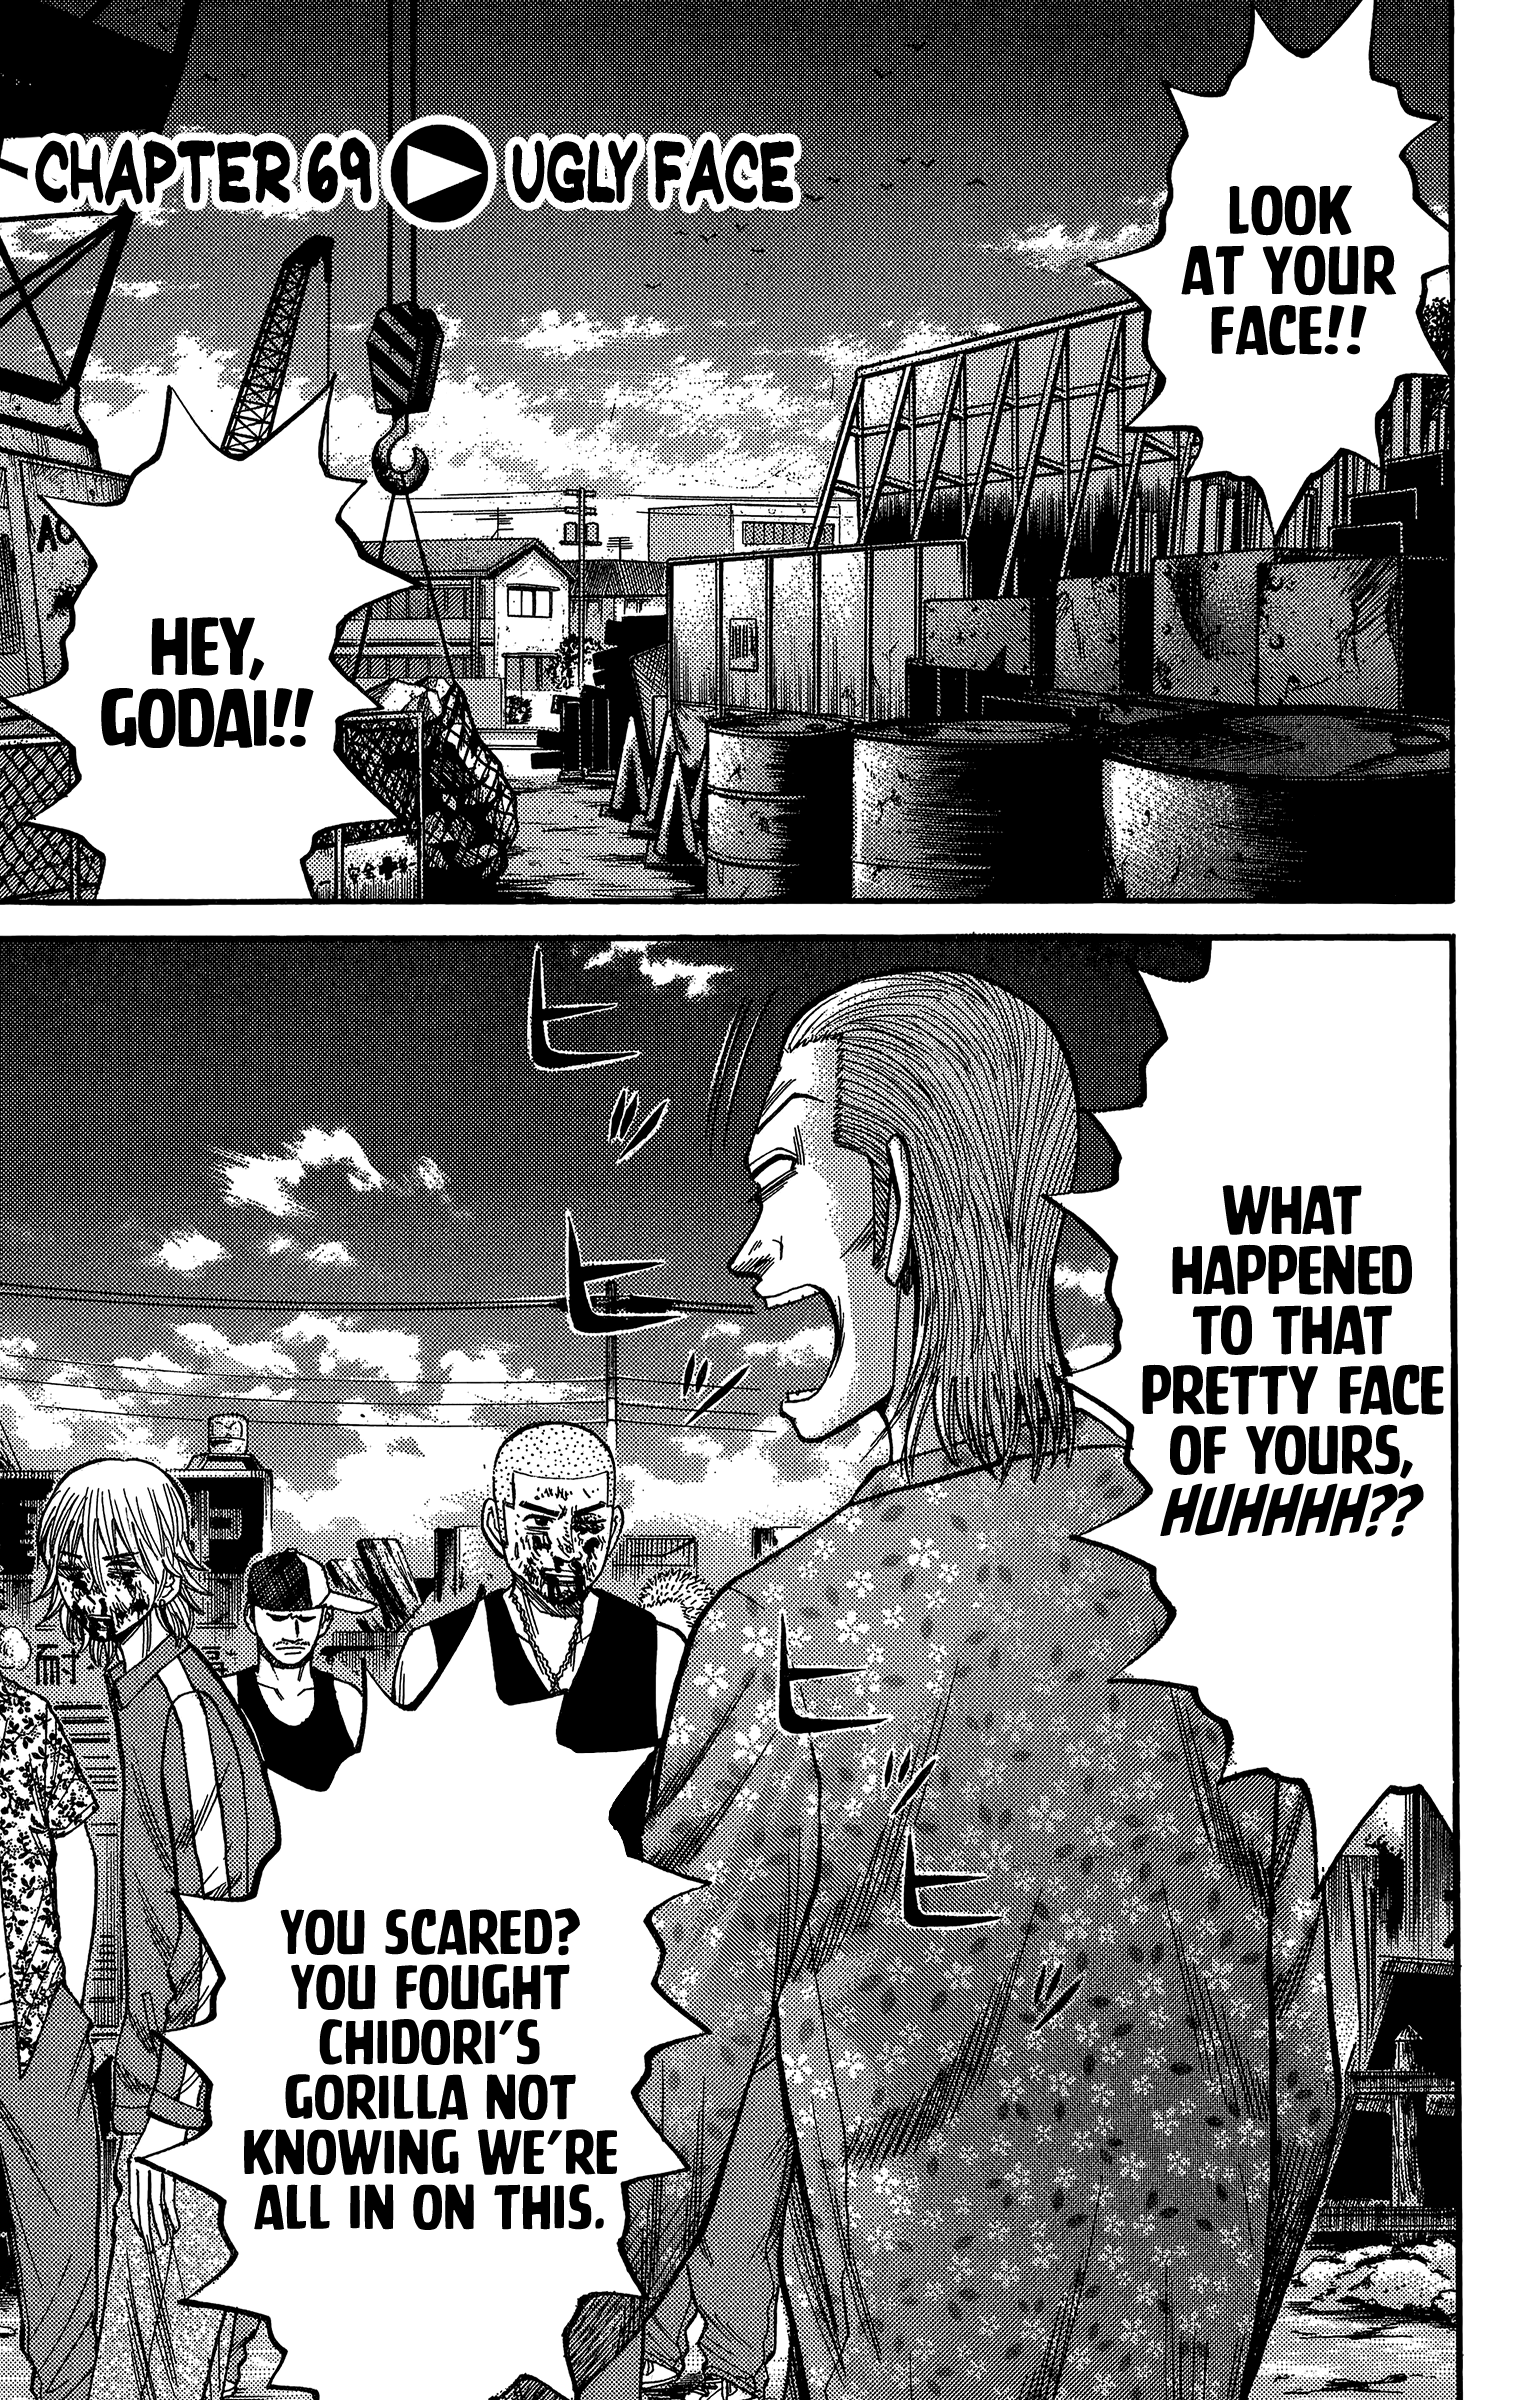 Nanba Mg5 Vol.8 Chapter 69: Ugly Face - Picture 1